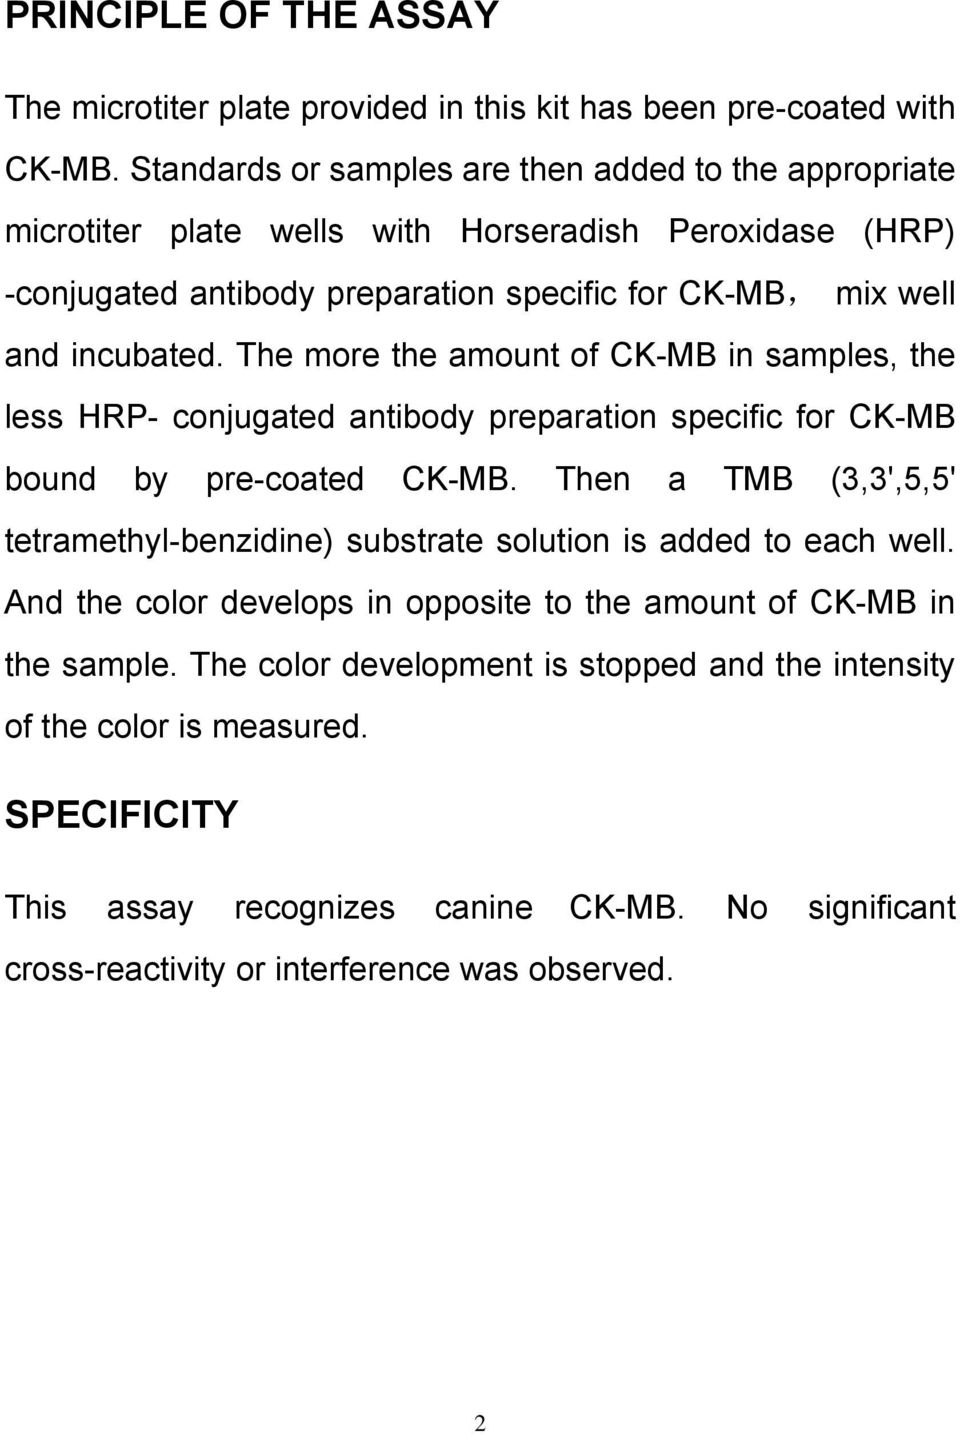 The more the amount of CK-MB in samples, the less HRP- conjugated antibody preparation specific for CK-MB bound by pre-coated CK-MB.